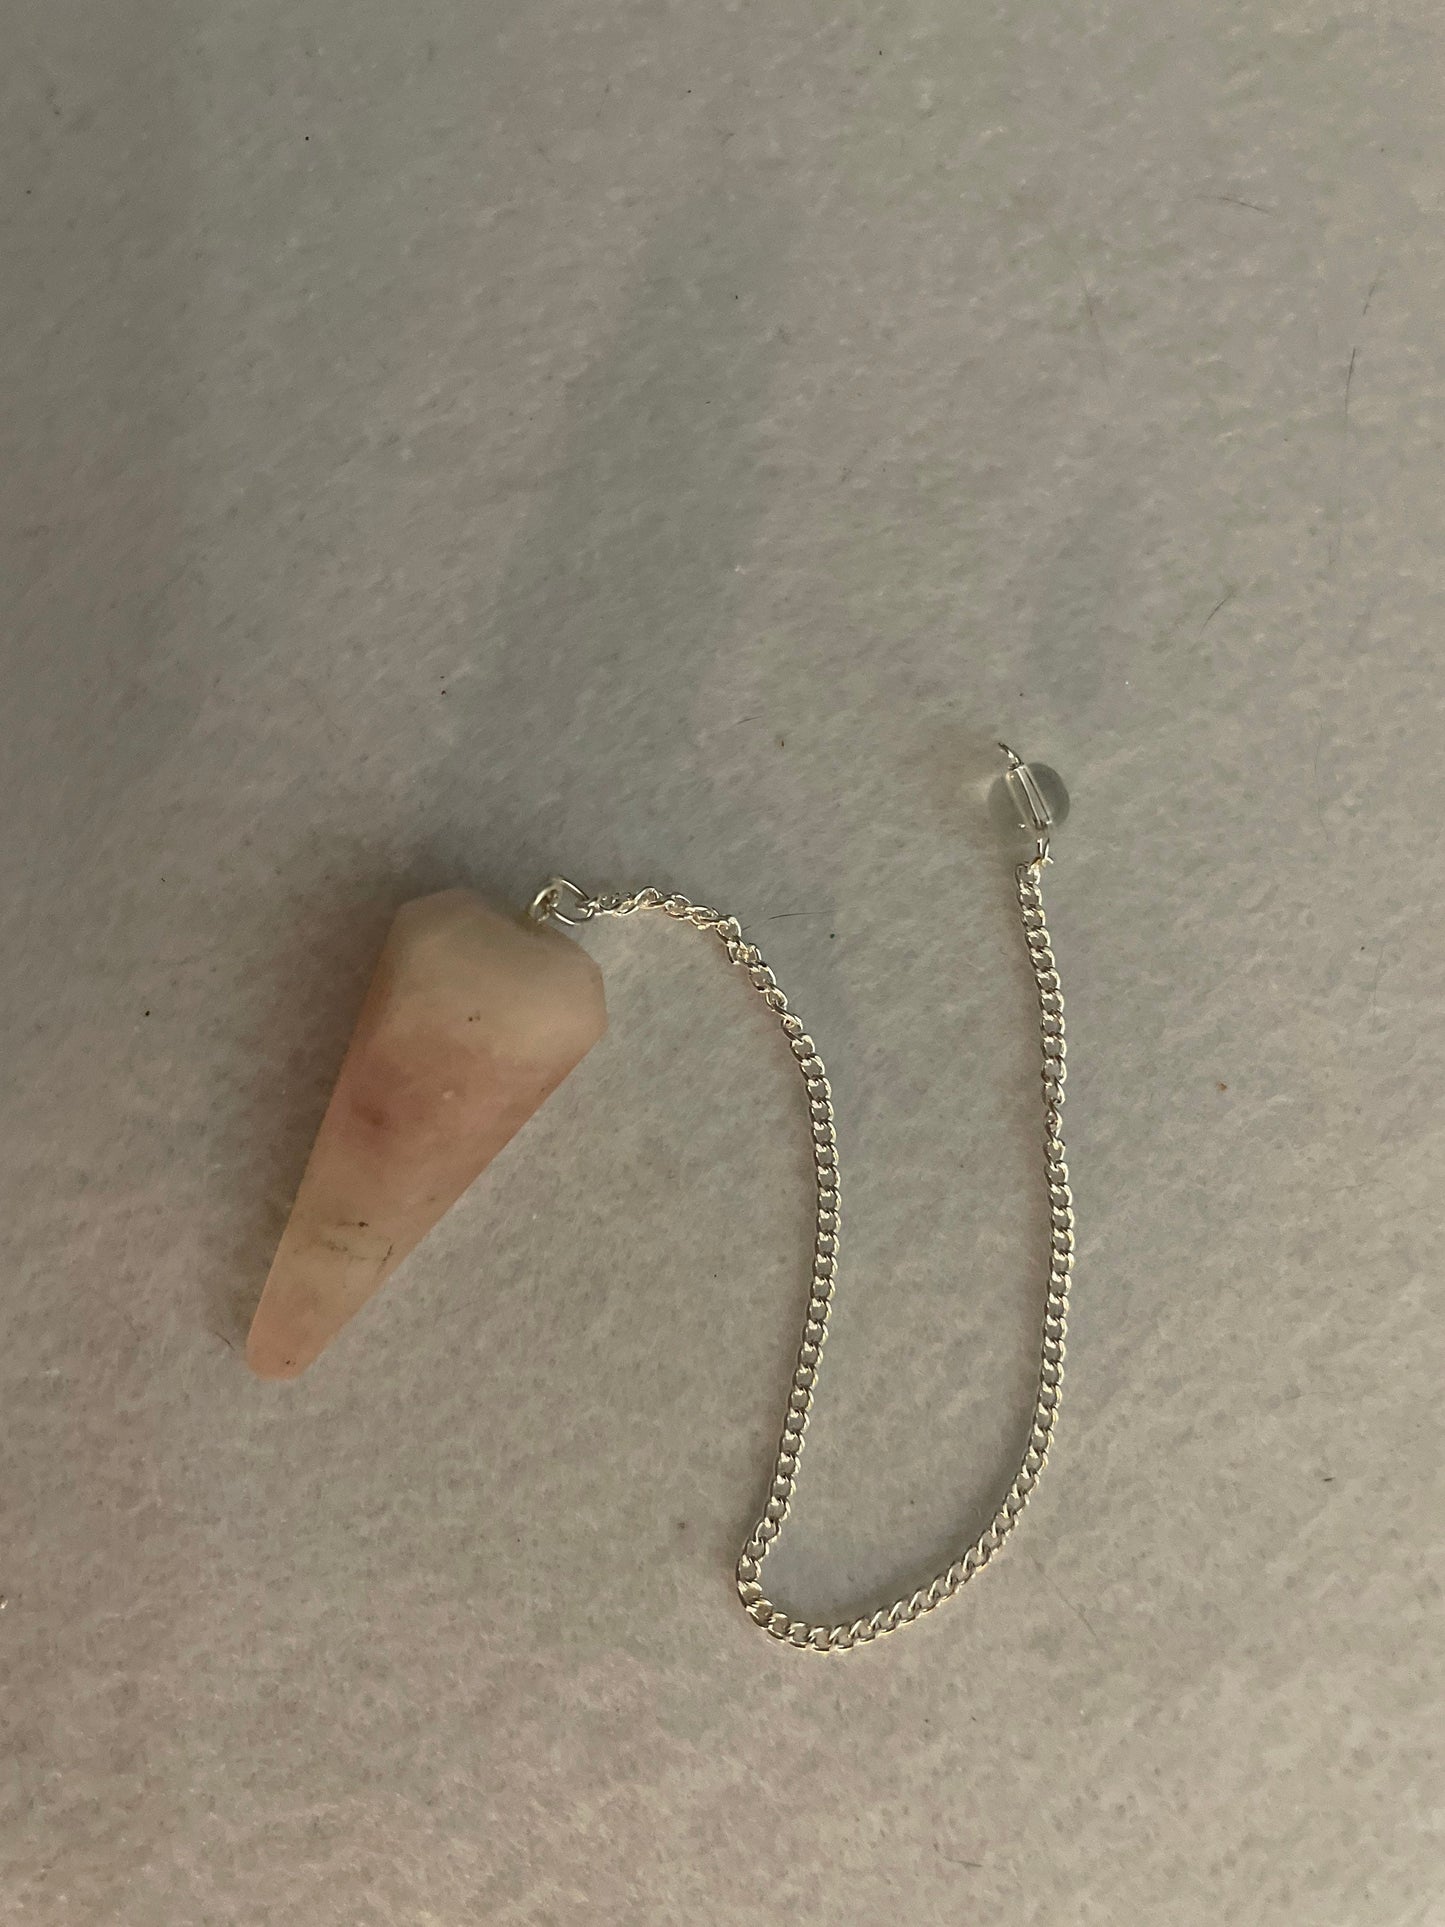 This beautiful Rose Quartz Pendulum is  1.65” and with chain is 8”